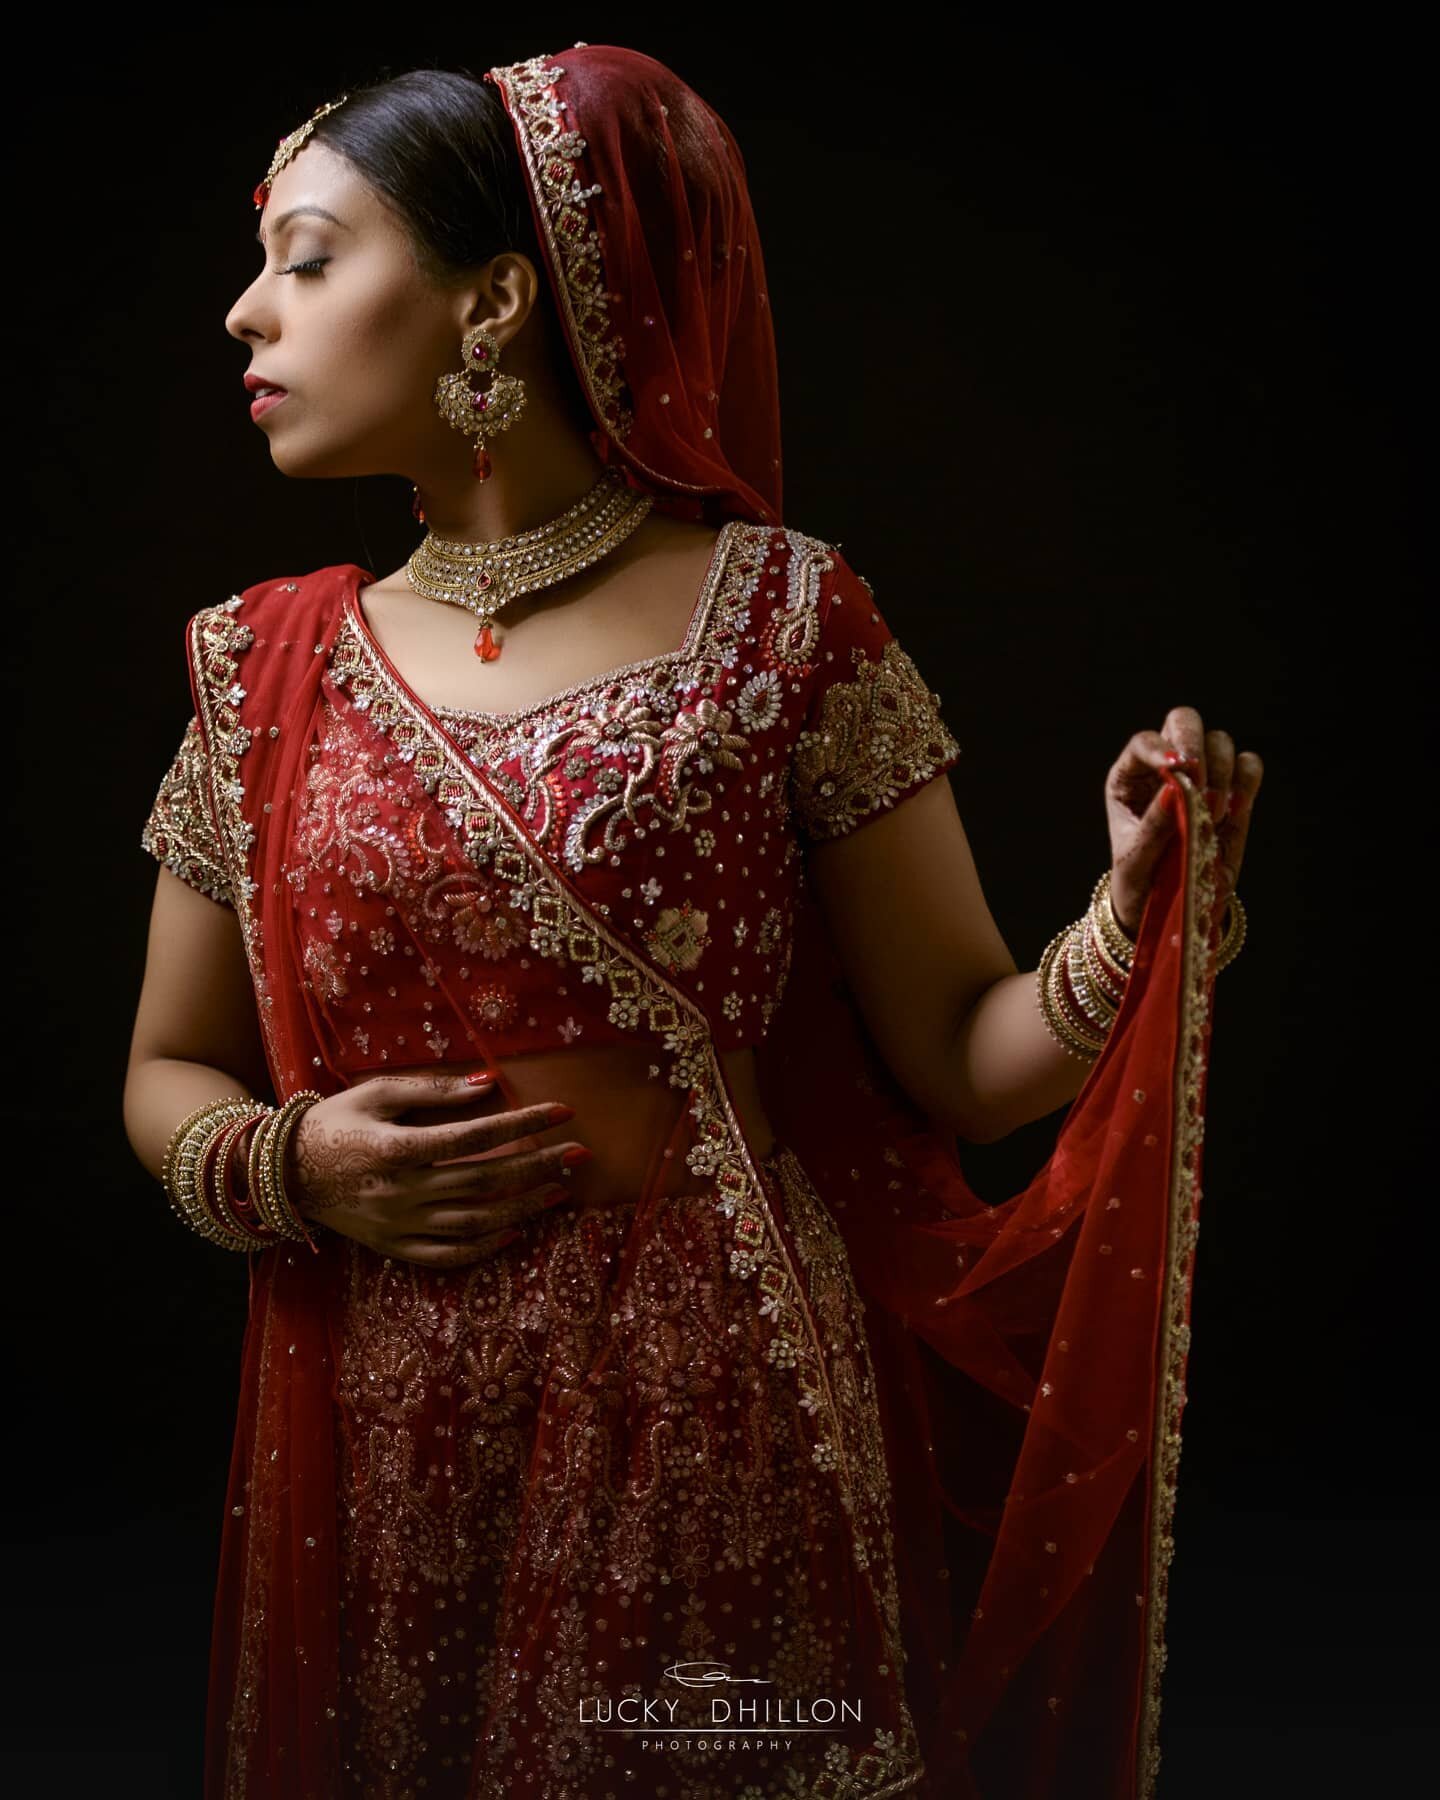 The beautiful bride Poonam. Just so happens to be my good friend from secondary school. Thank you for inviting me to photograph your and Anup's incredible wedding.

www.luckydhillon.com
#luckydhillonphotography